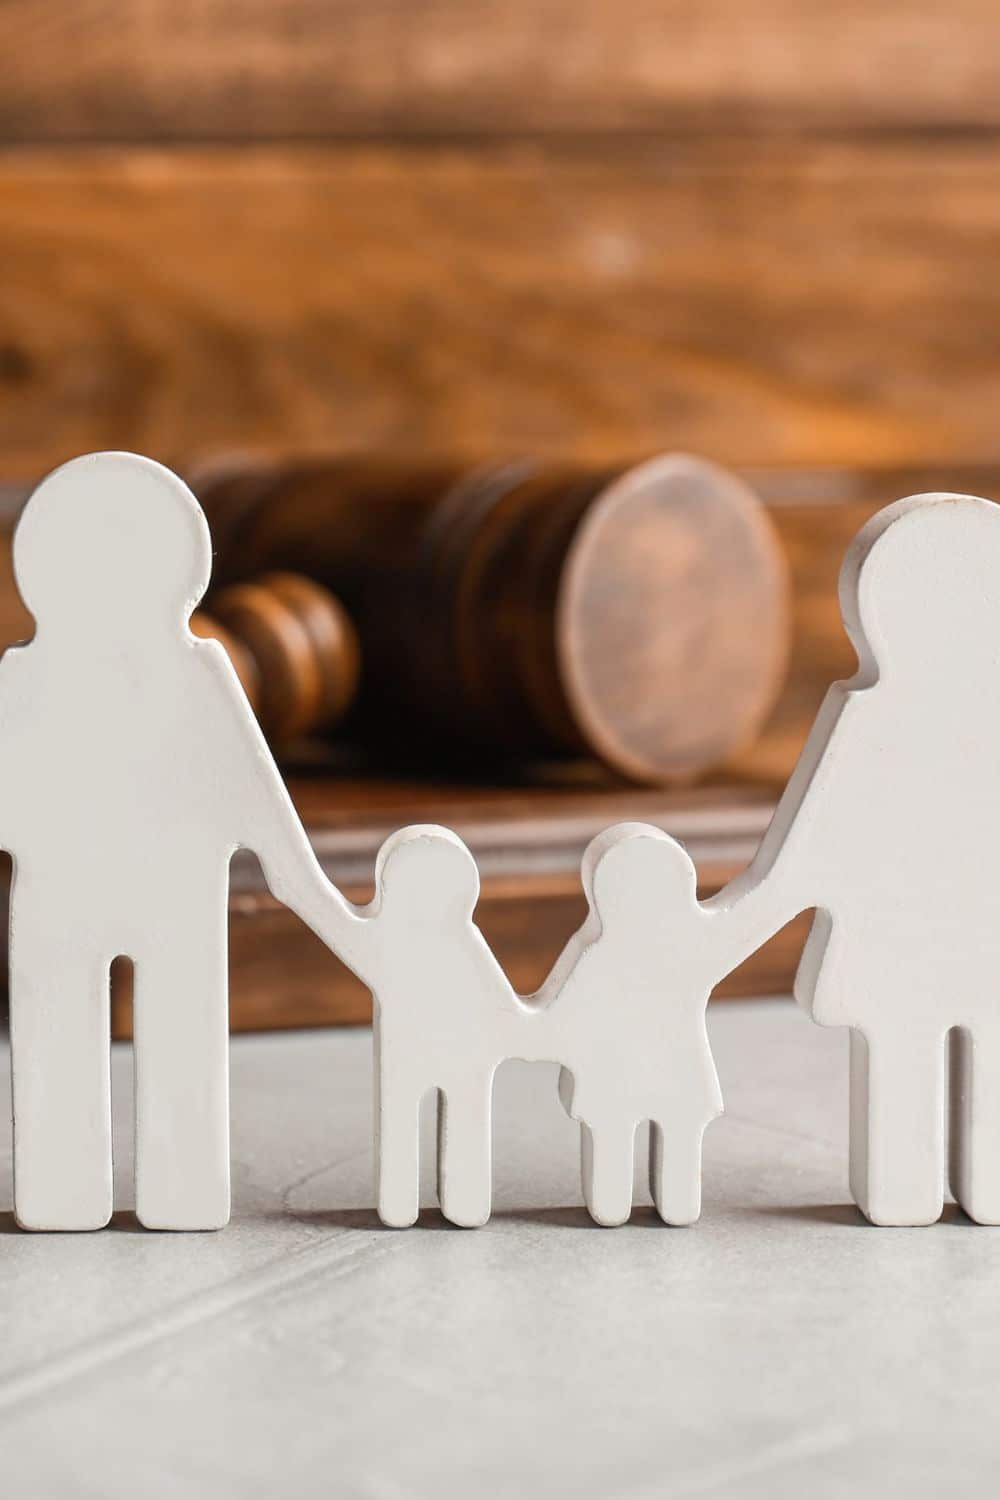 6 Ways That Family Lawyers Can Help You and Your Family